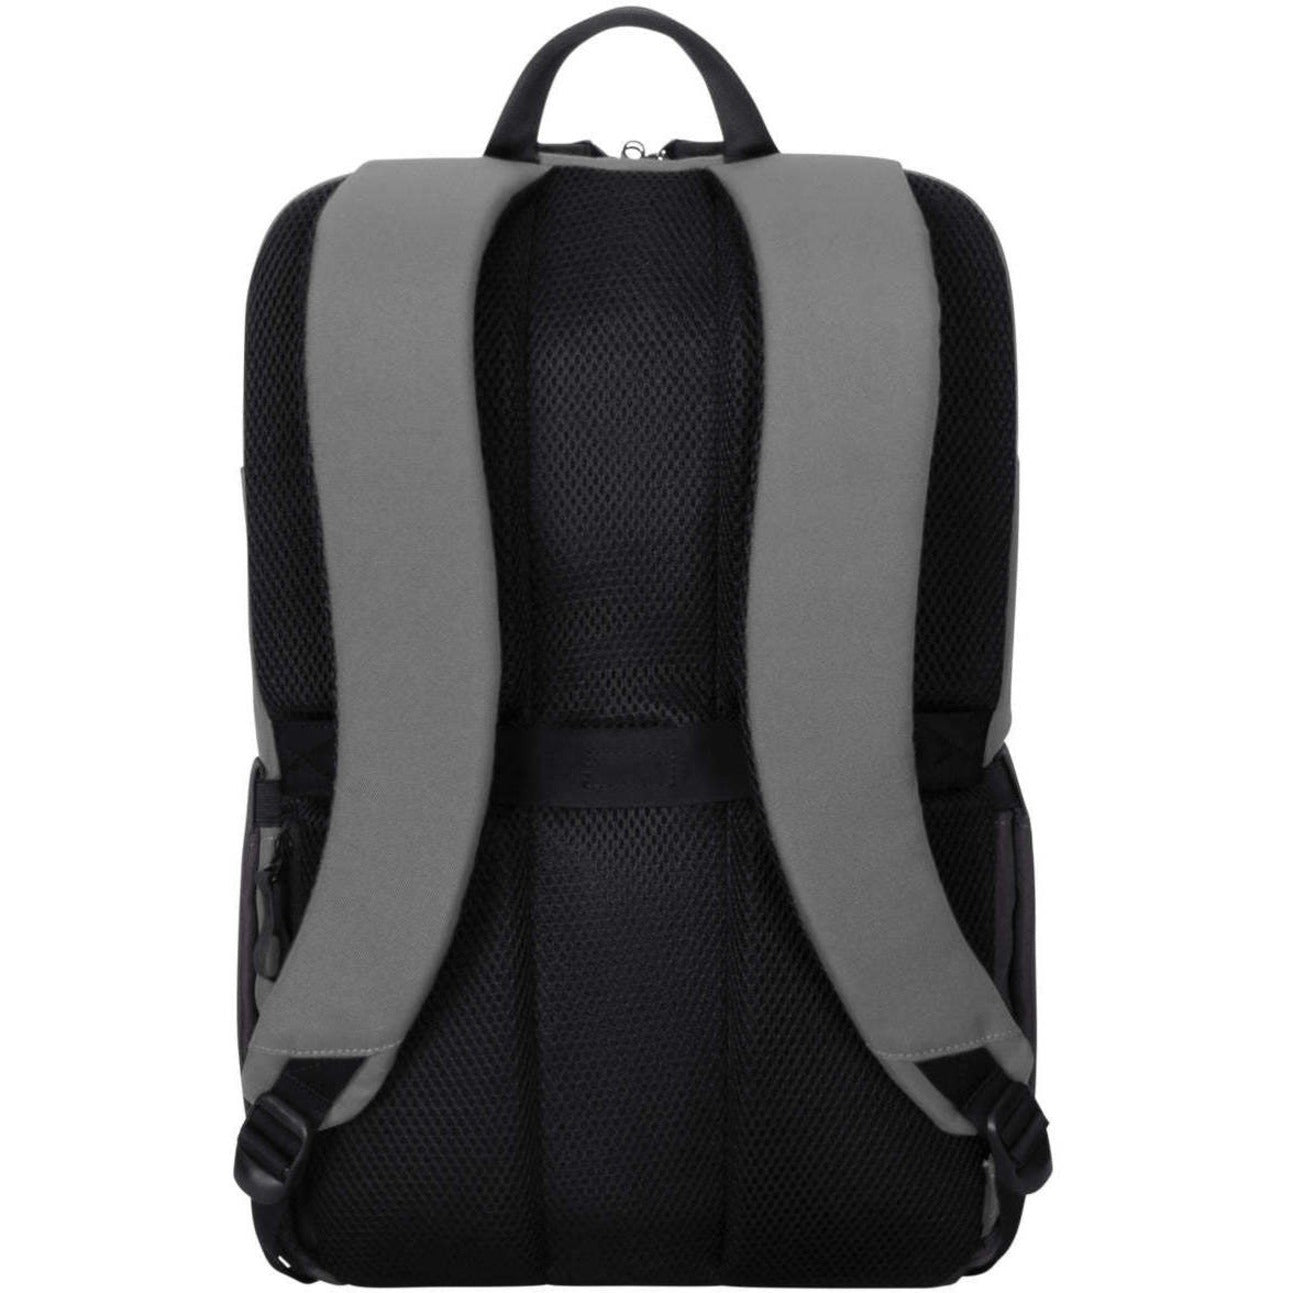 Targus Sagano EcoSmart TBB634GL Carrying Case (Backpack) for 15.6" Notebook Tablet Accessories - Black/Gray